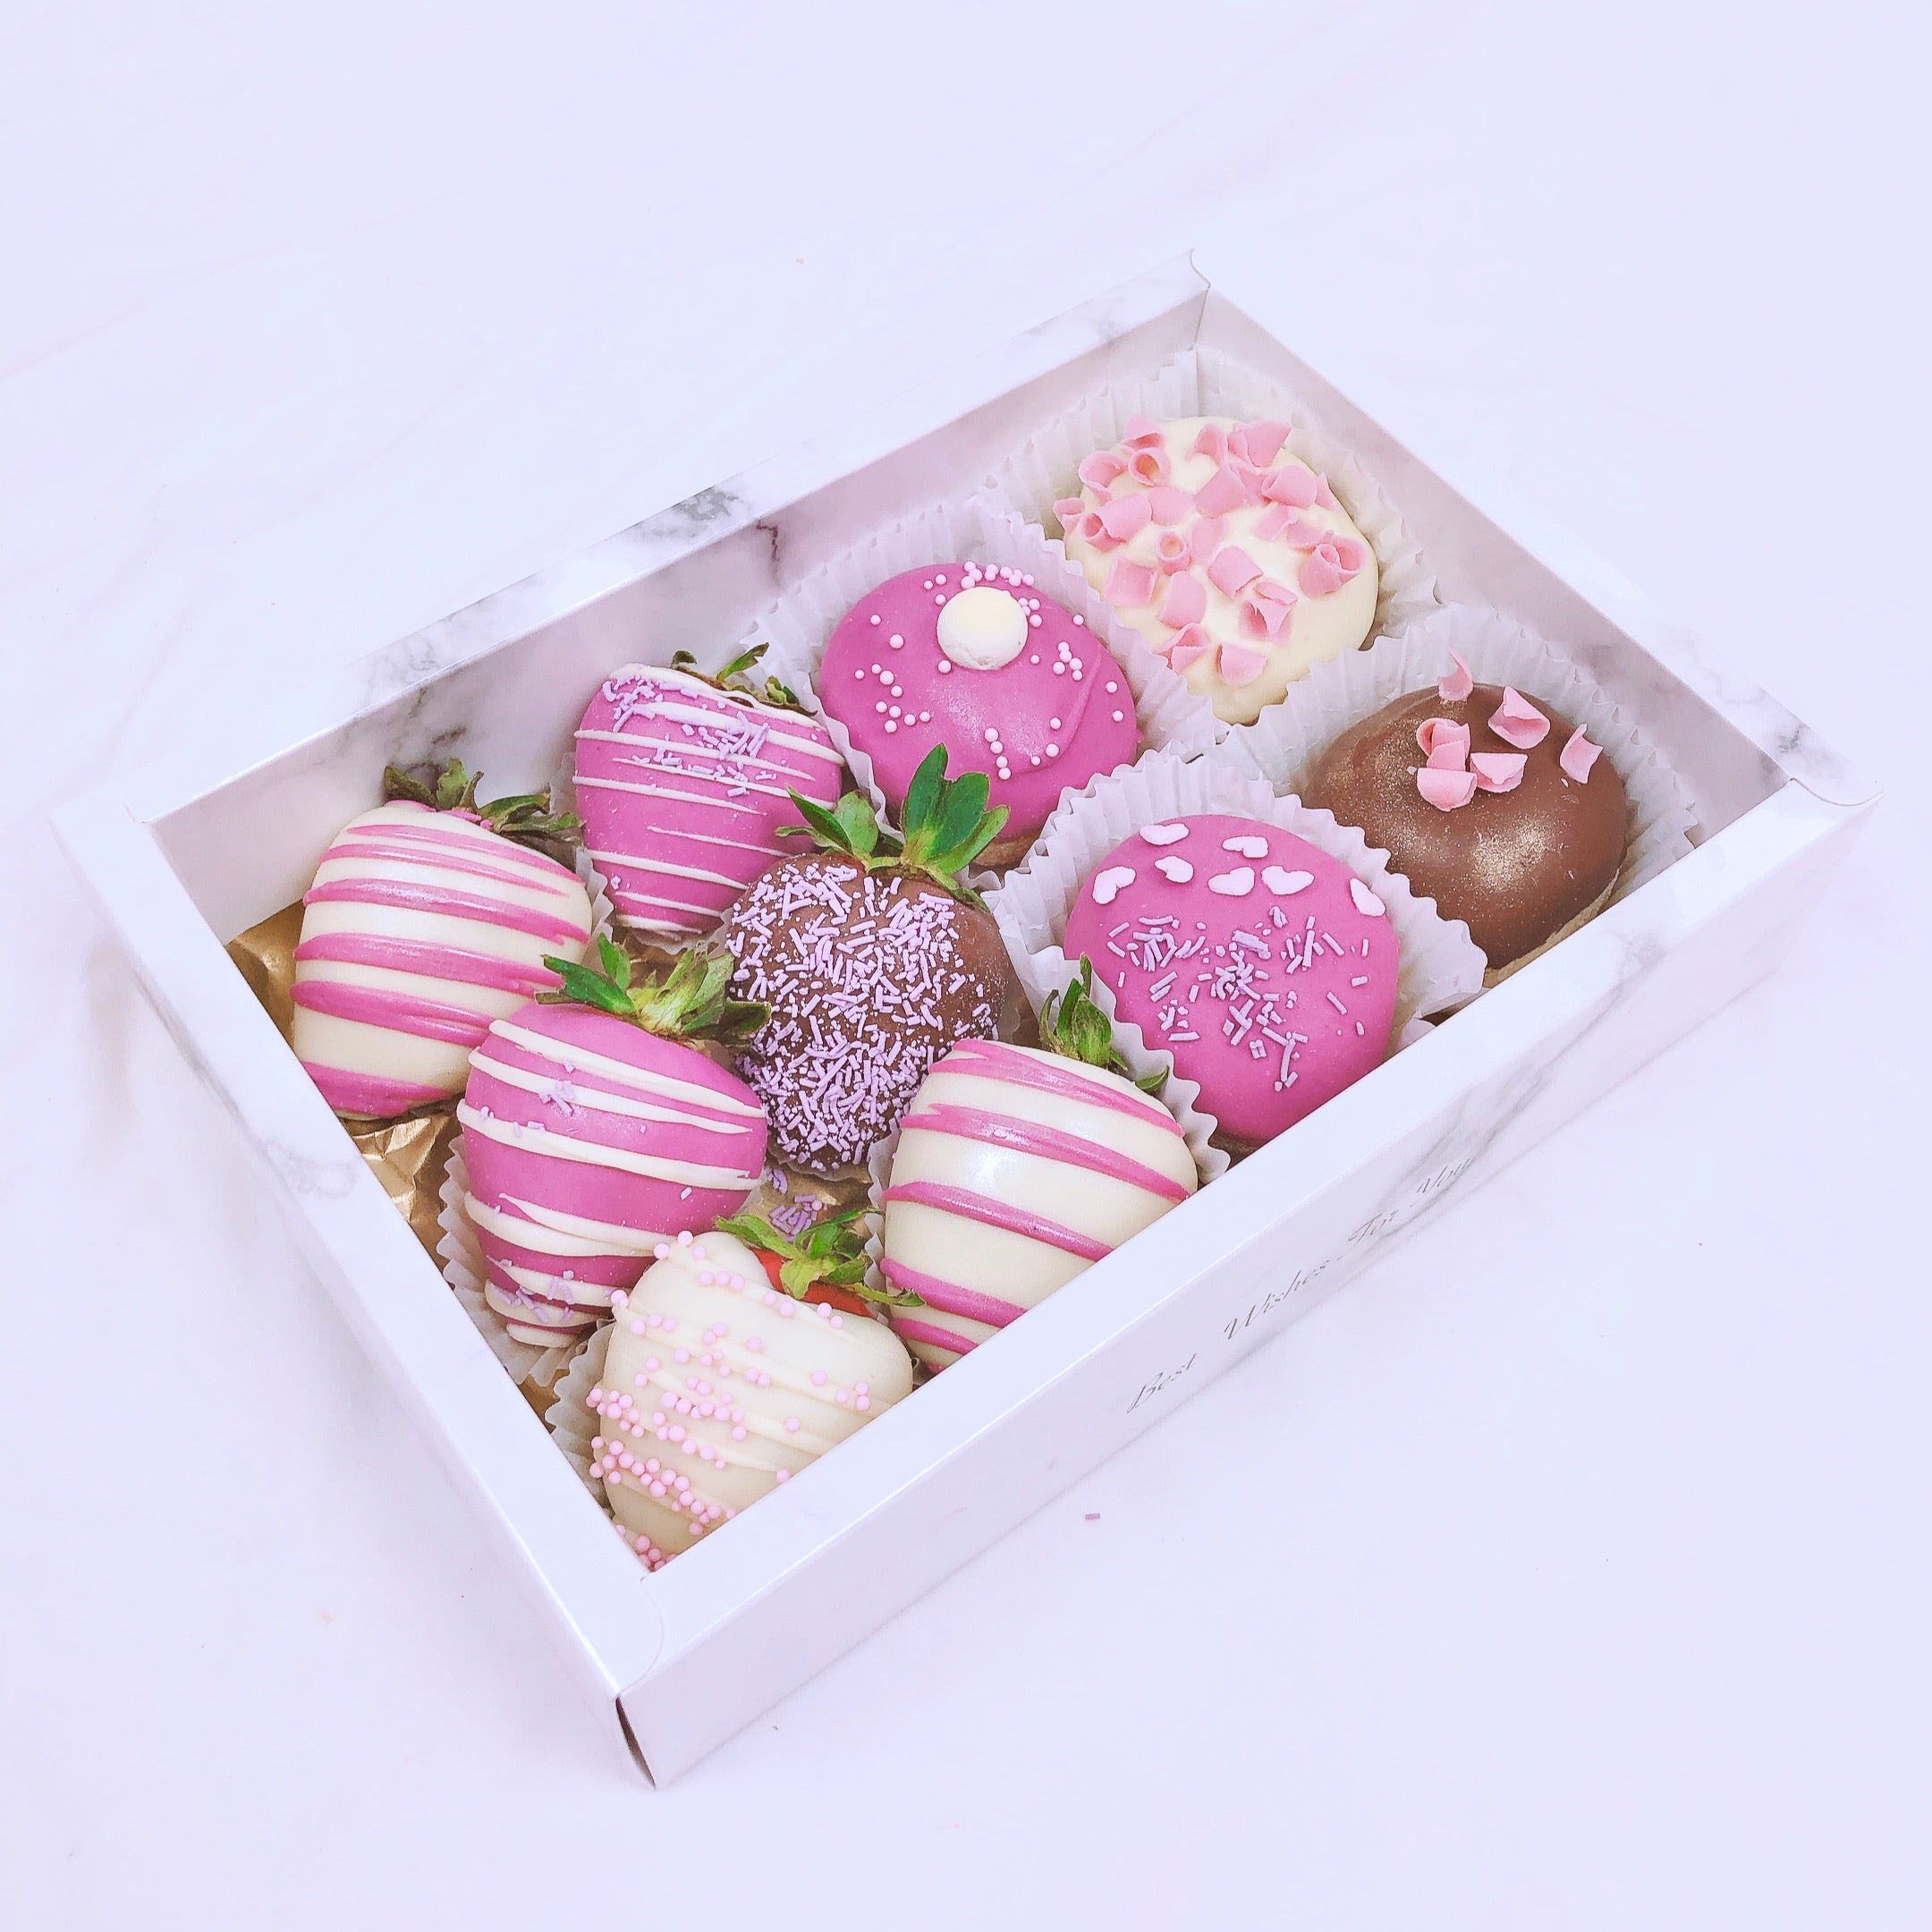 dessert box of chocolate covered strawberries and gourmet doughnuts in a gift box same day delivery Adelaide